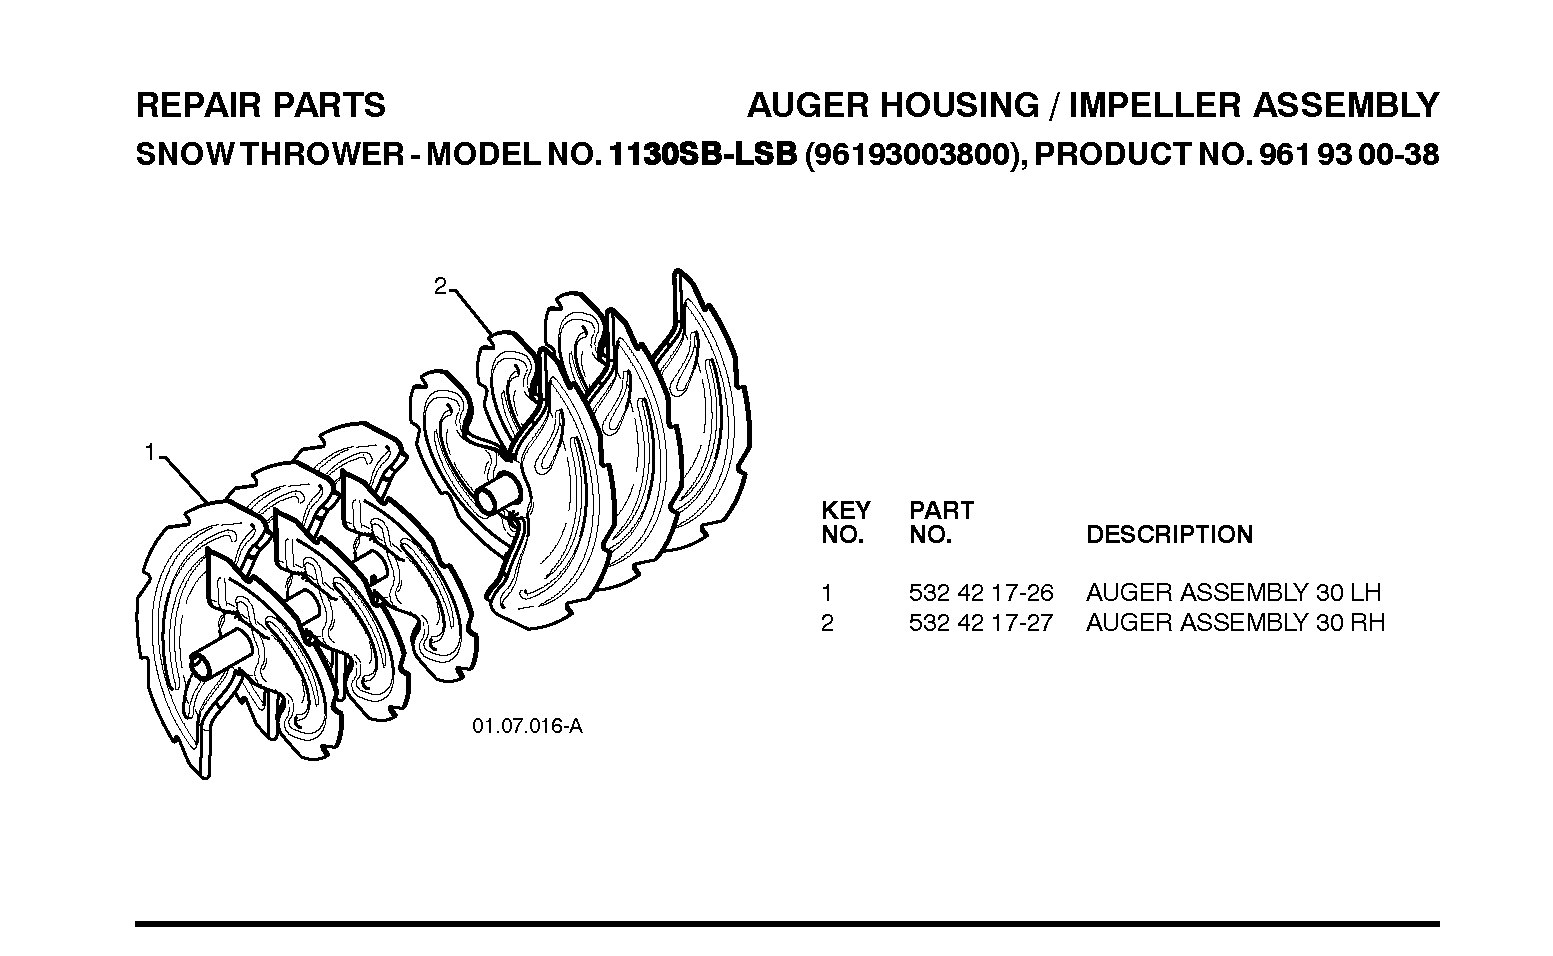 Auger housing and impeller 532421726, 532421727